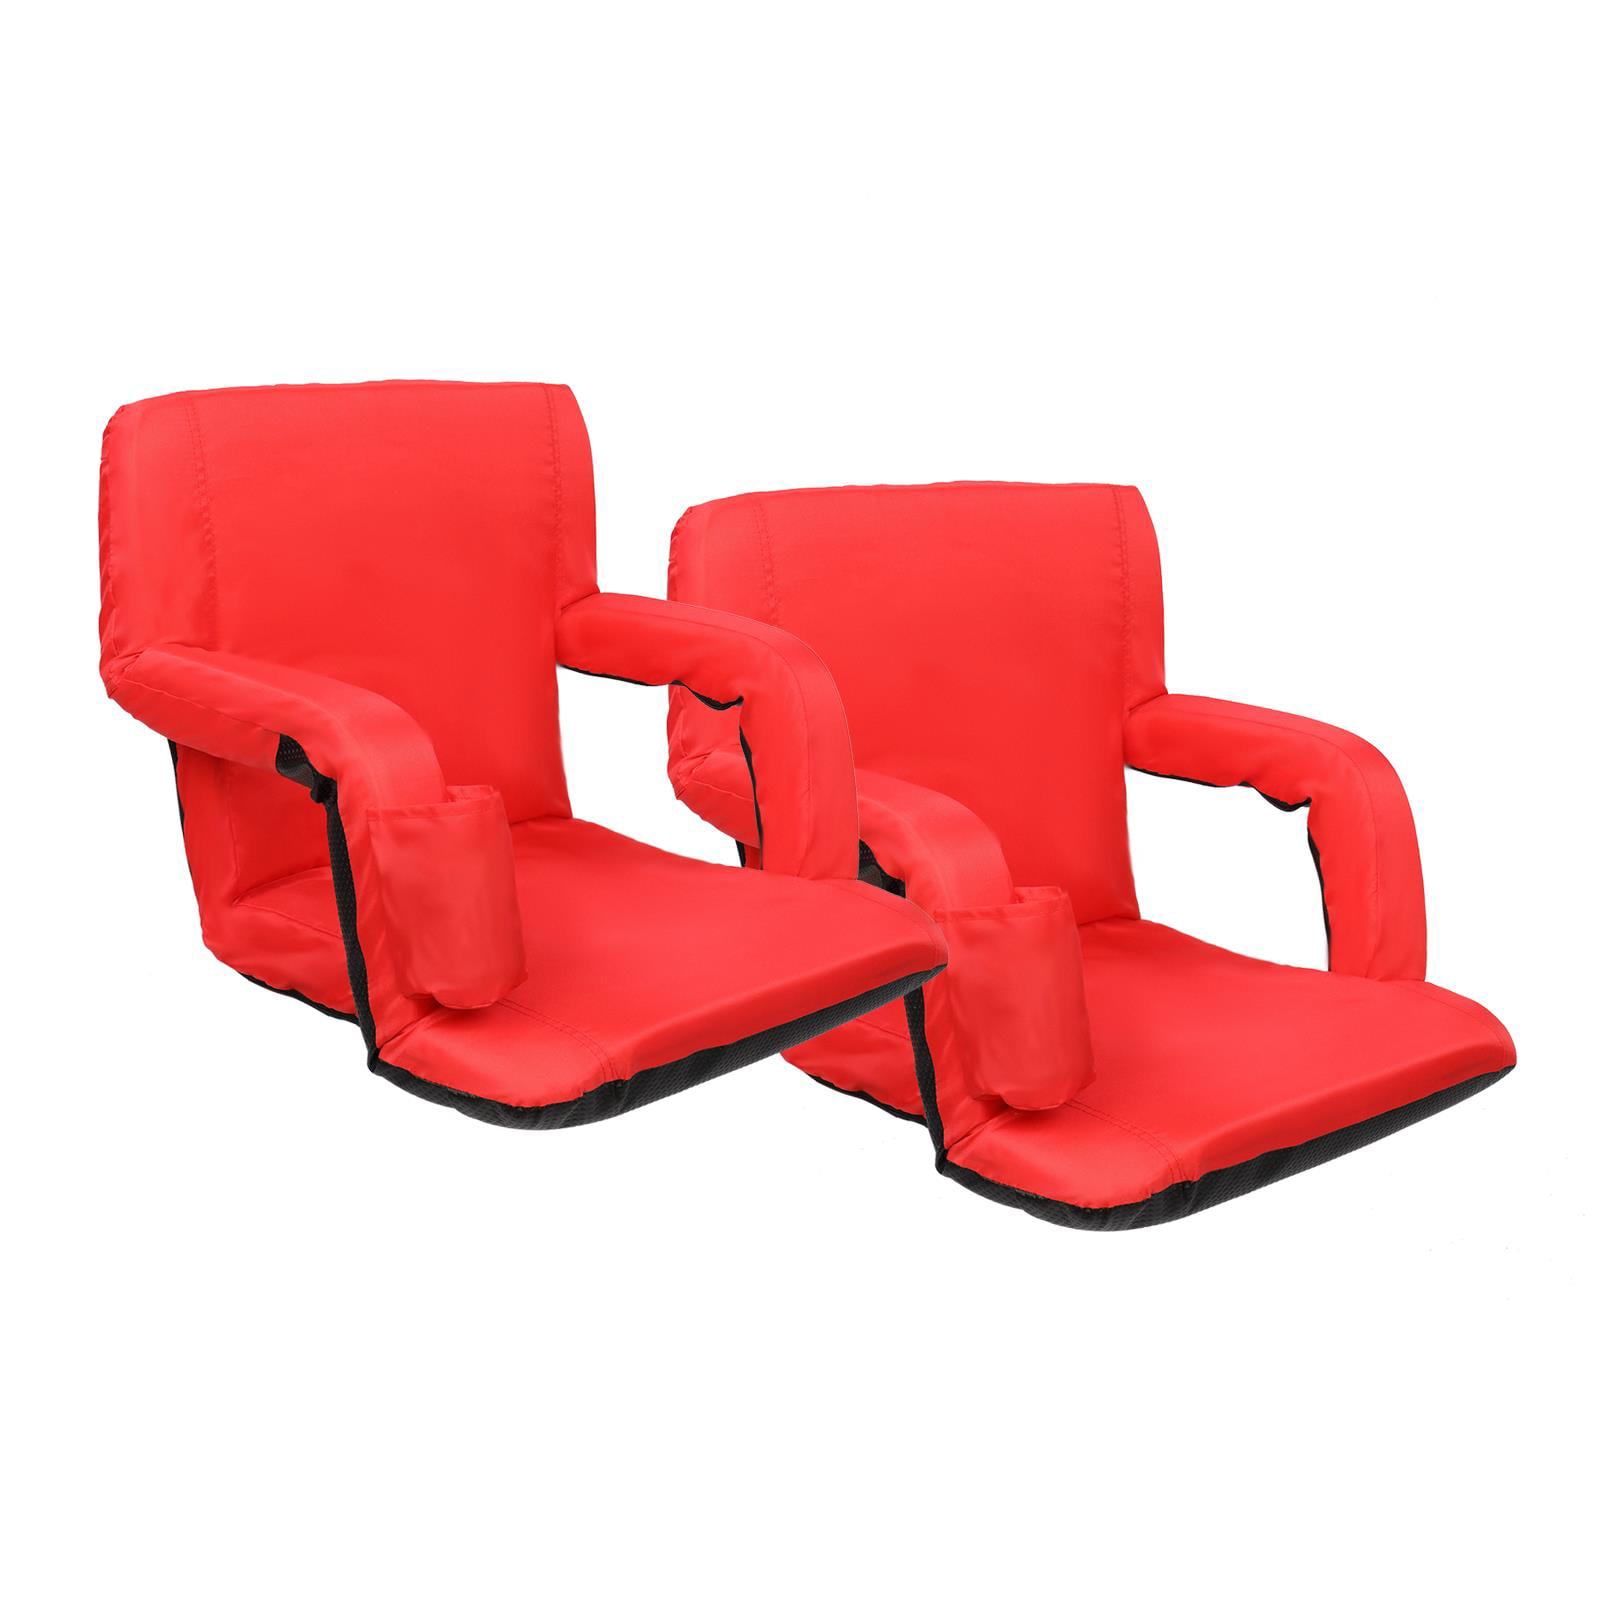 Padded Stadium Seat Portable Chair Red Bleacher Cushion Folding Bench Camping 